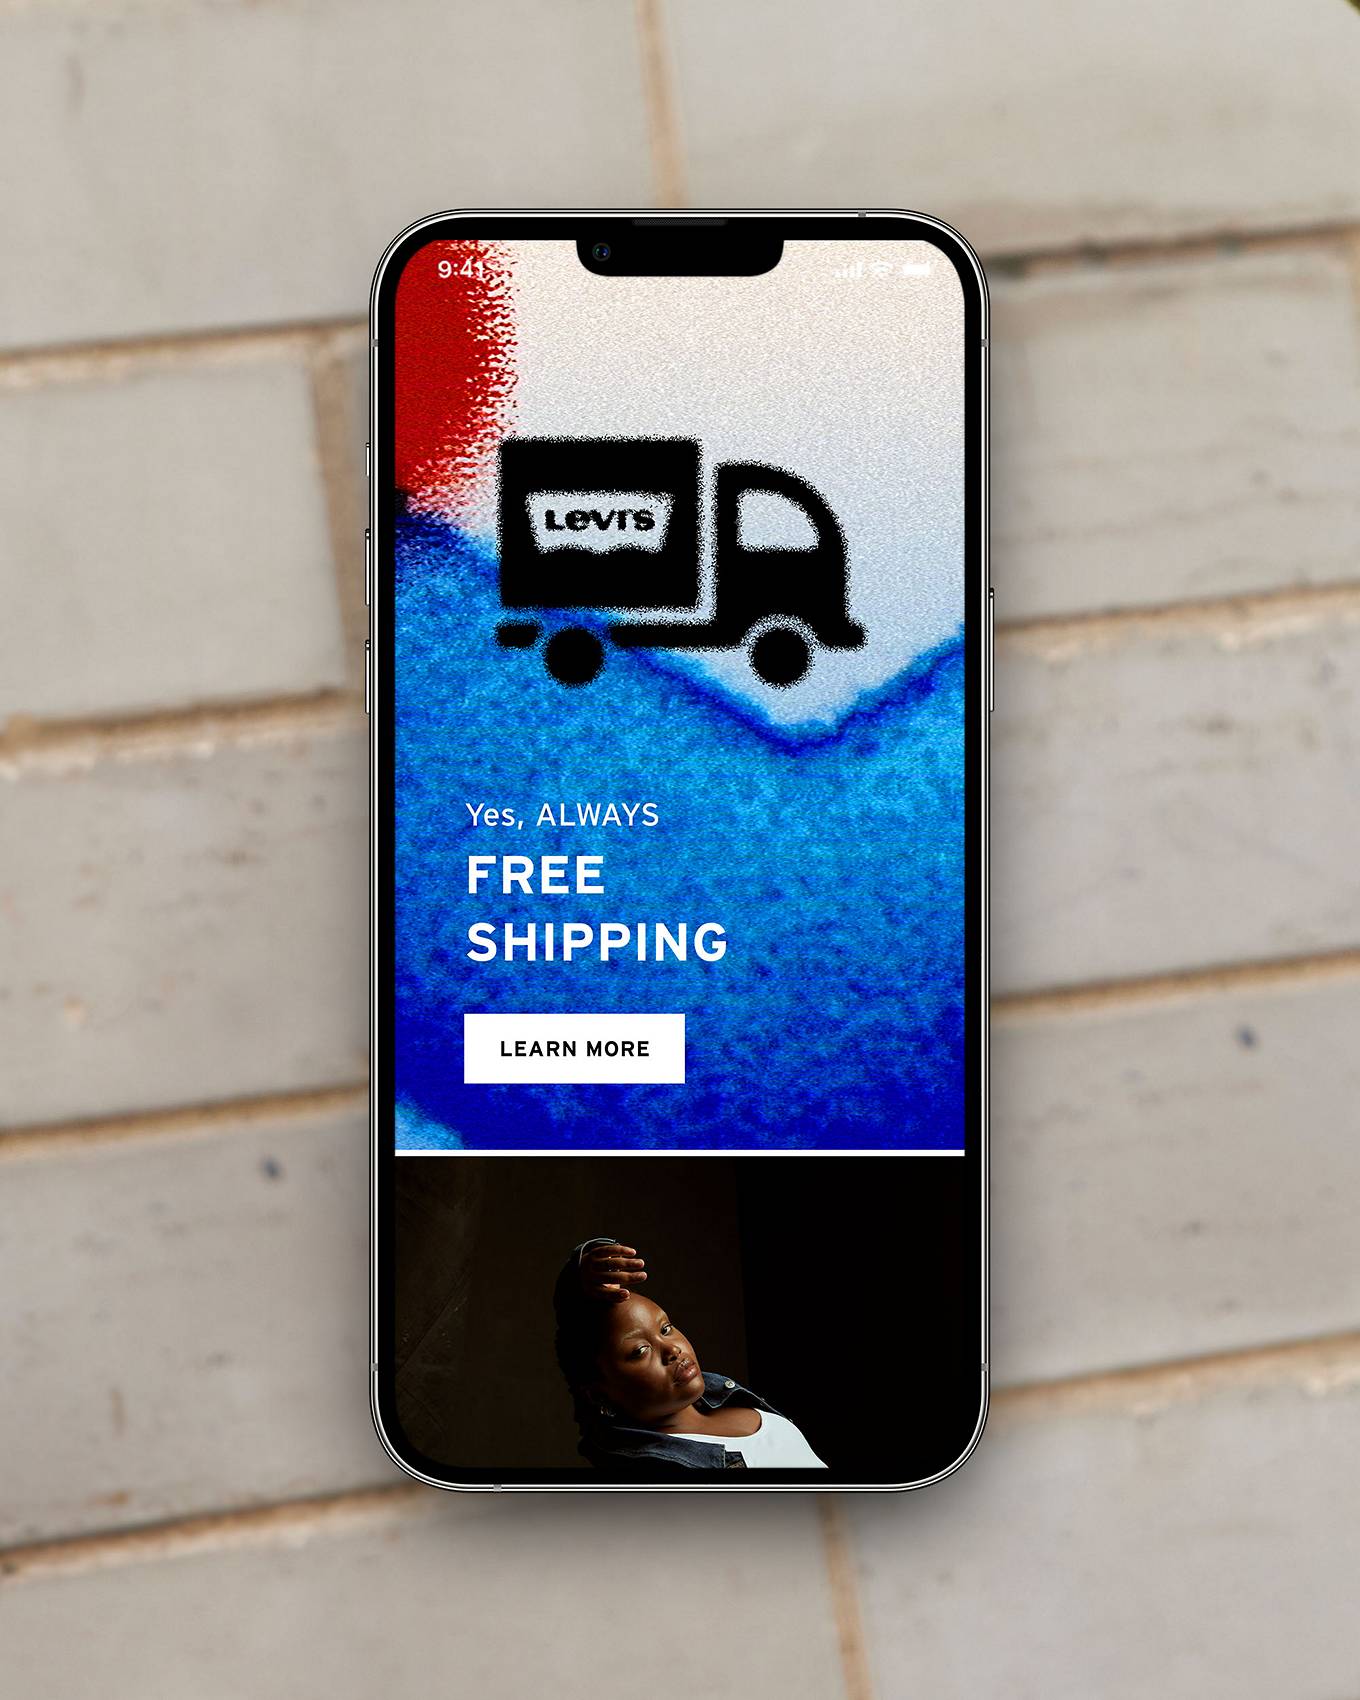 Free Shipping Always - In app card which shows our free shipping truck icon